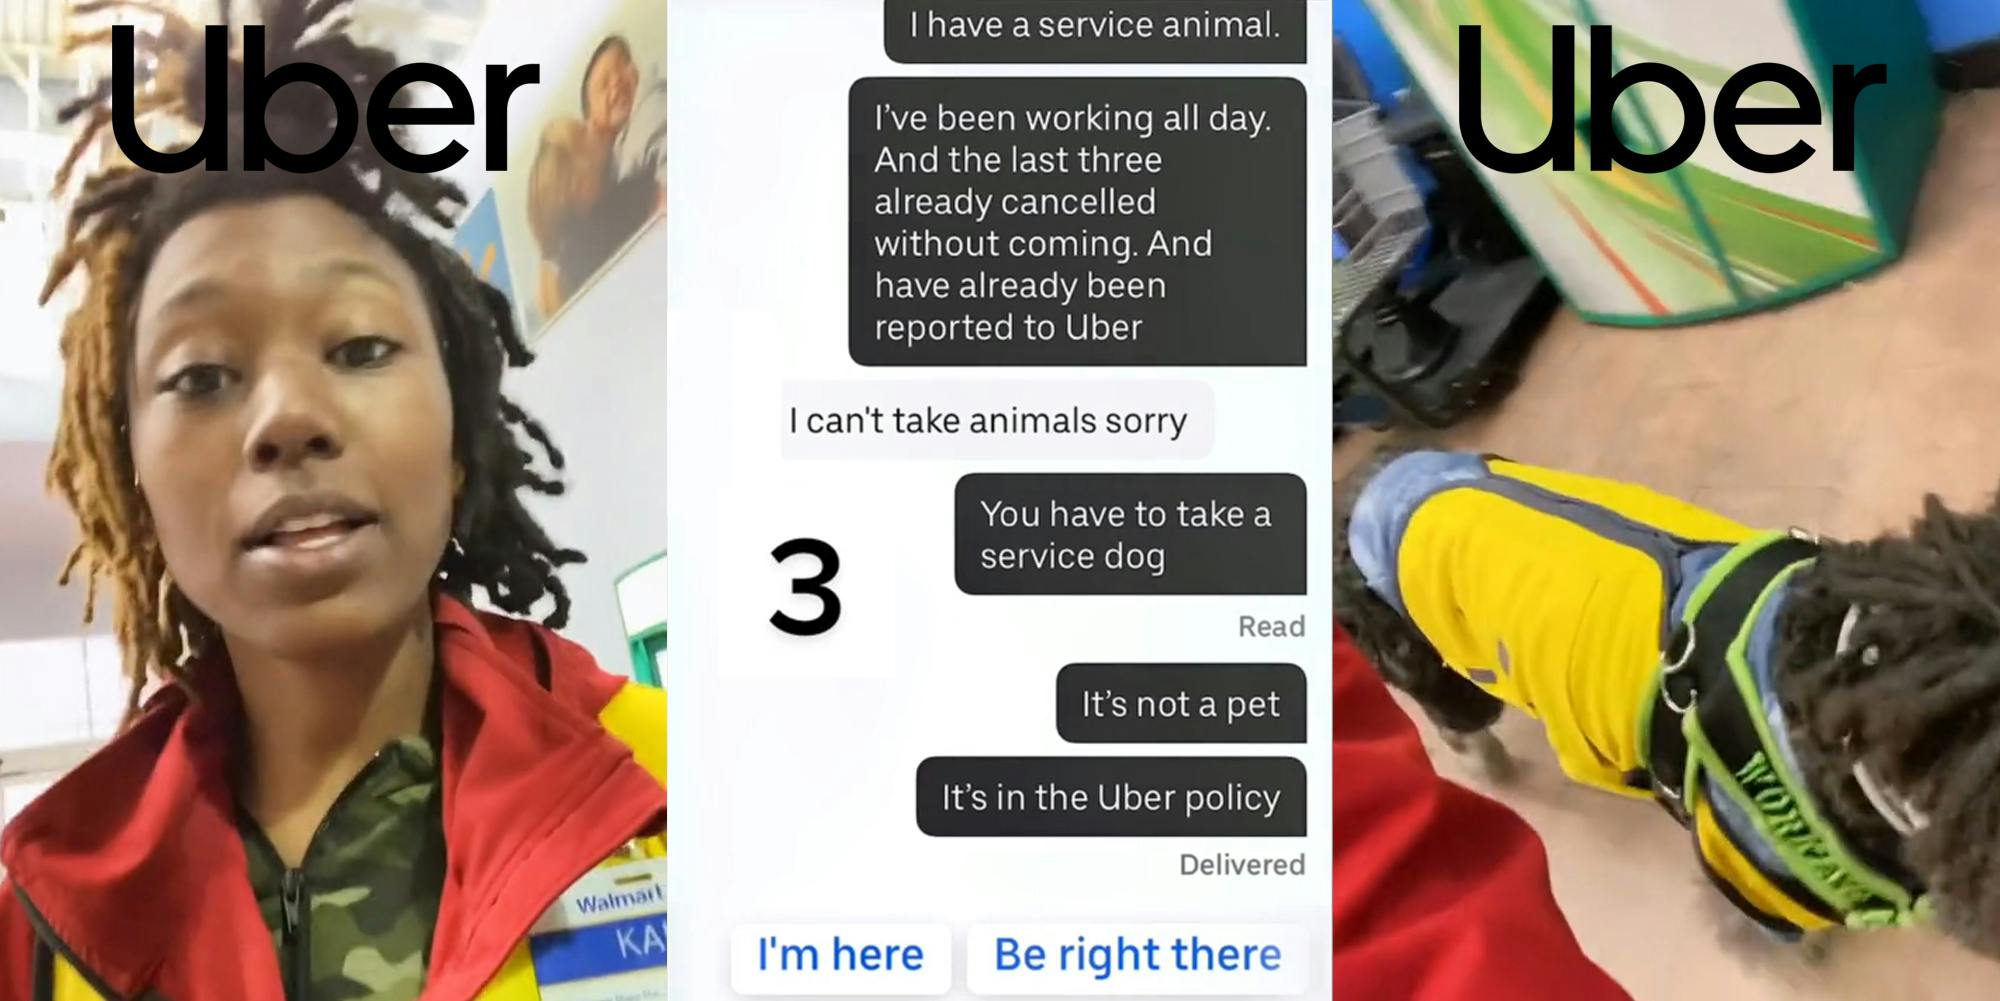 Walmart employee speaking with Uber logo above (l) messages between Uber driver and Walmart employee "I have a service animal. I've been working all day. And the last three already cancelled without coming. And have already been reported to Uber. I can't take animals sorry You have to take a service dog It's not a pet. It's in the Uber policy" "3" (c) Service dog walking with Uber logo above (r)